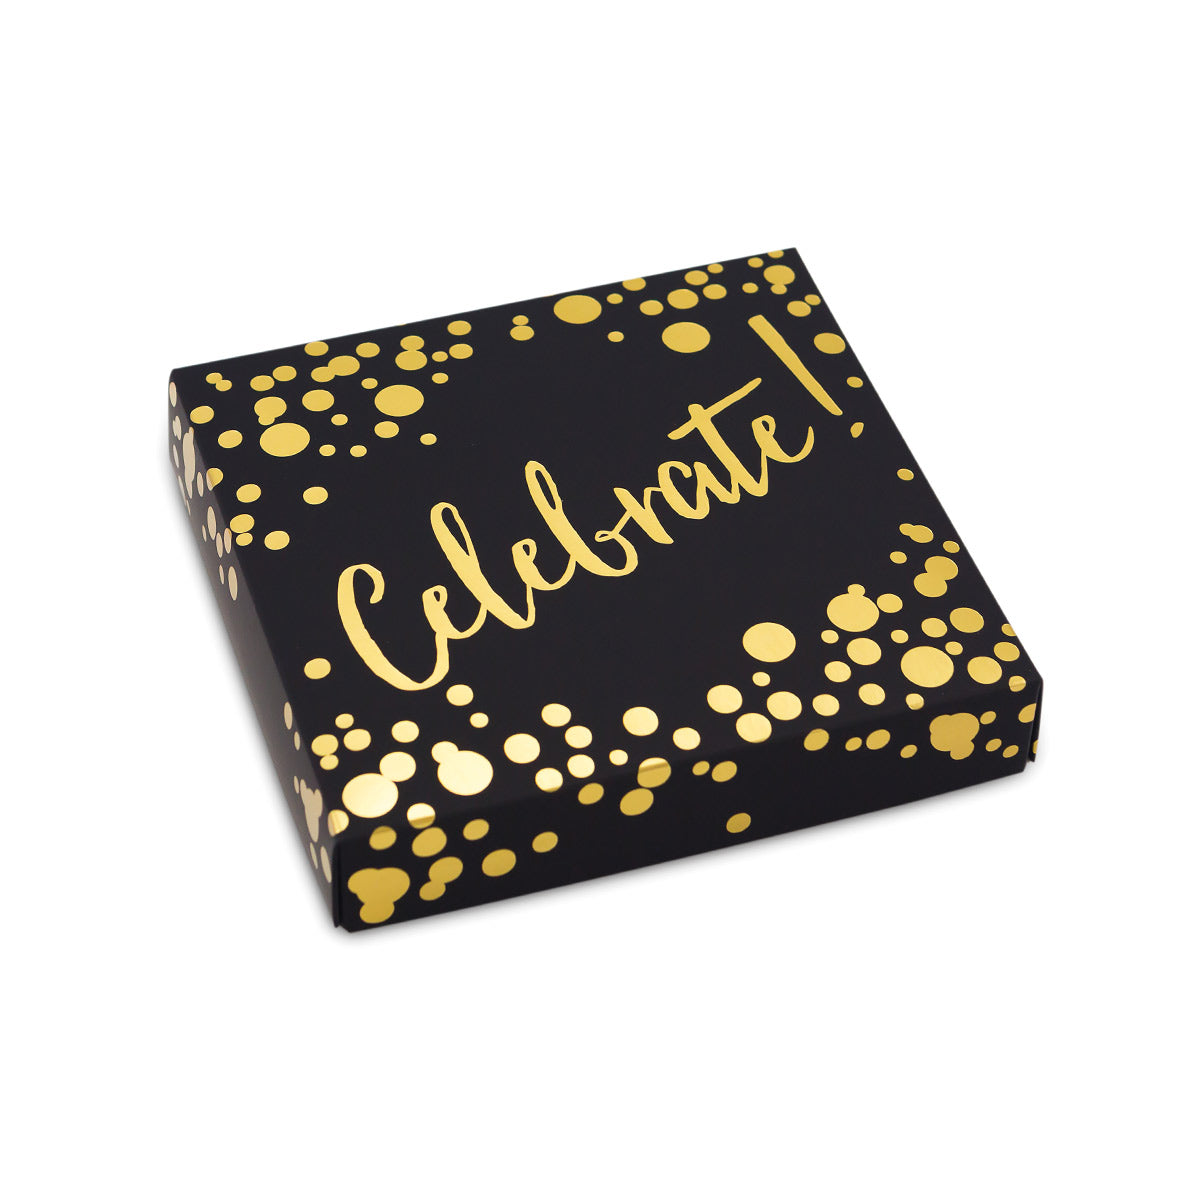 Celebrate Themed Box Cover for 9 Piece Holiday Assortment